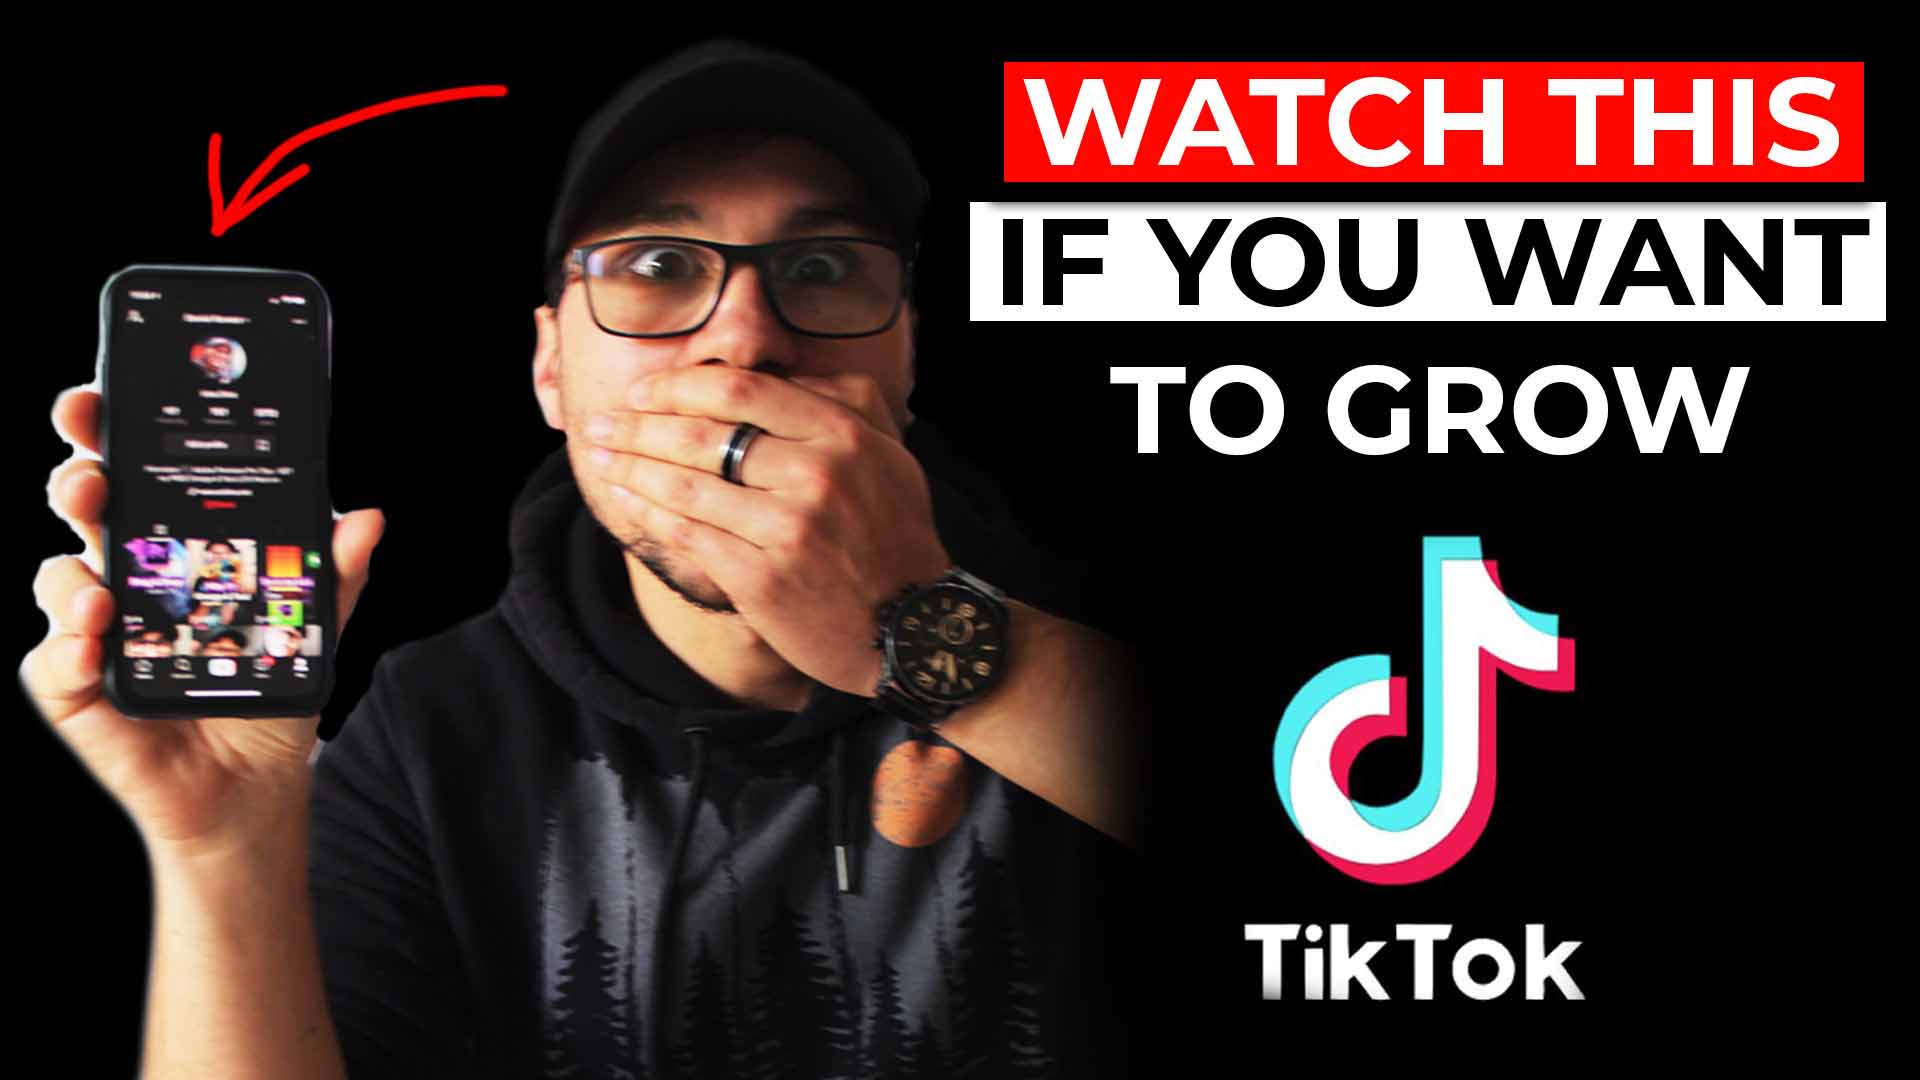 30 Days on TikTok What I learnt from posting 1 video a day for 30 days straight